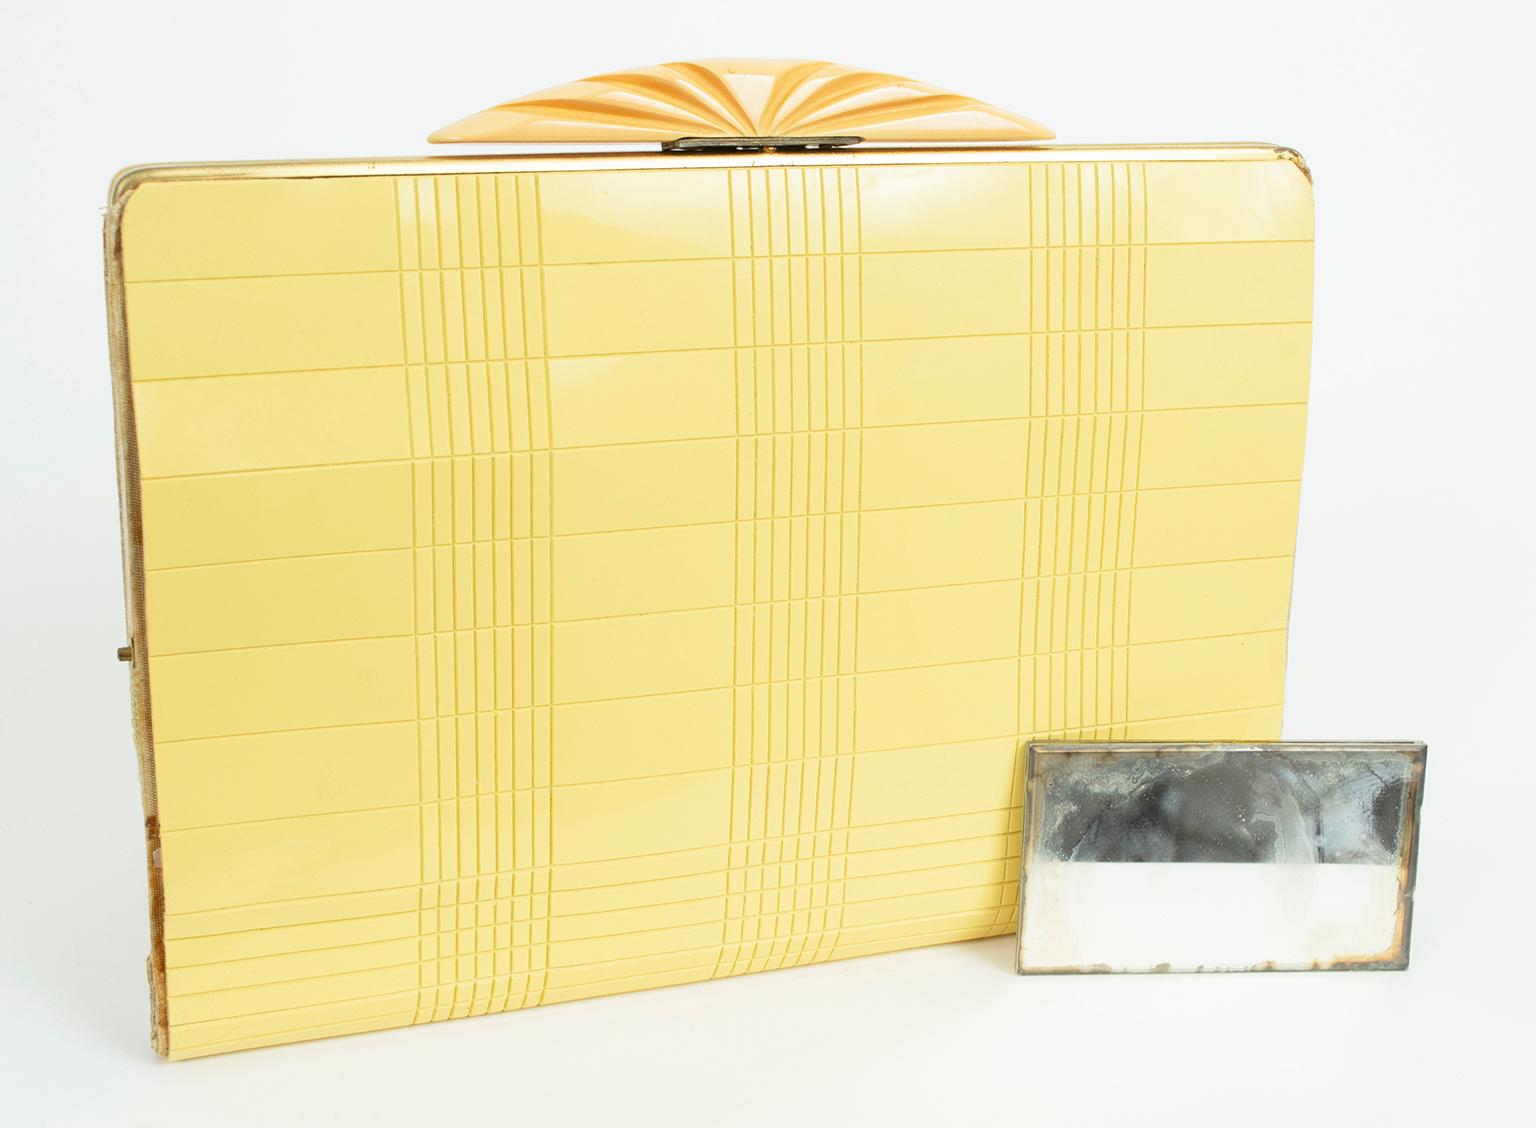 From its buttery color to its Moderne grooved surface to its exquisite carved Bakelite clasp, this day or evening clutch is a statement accessory that speaks volumes in style. Pairs beautifully with our stack of butterscotch carved Bakelite bangles,